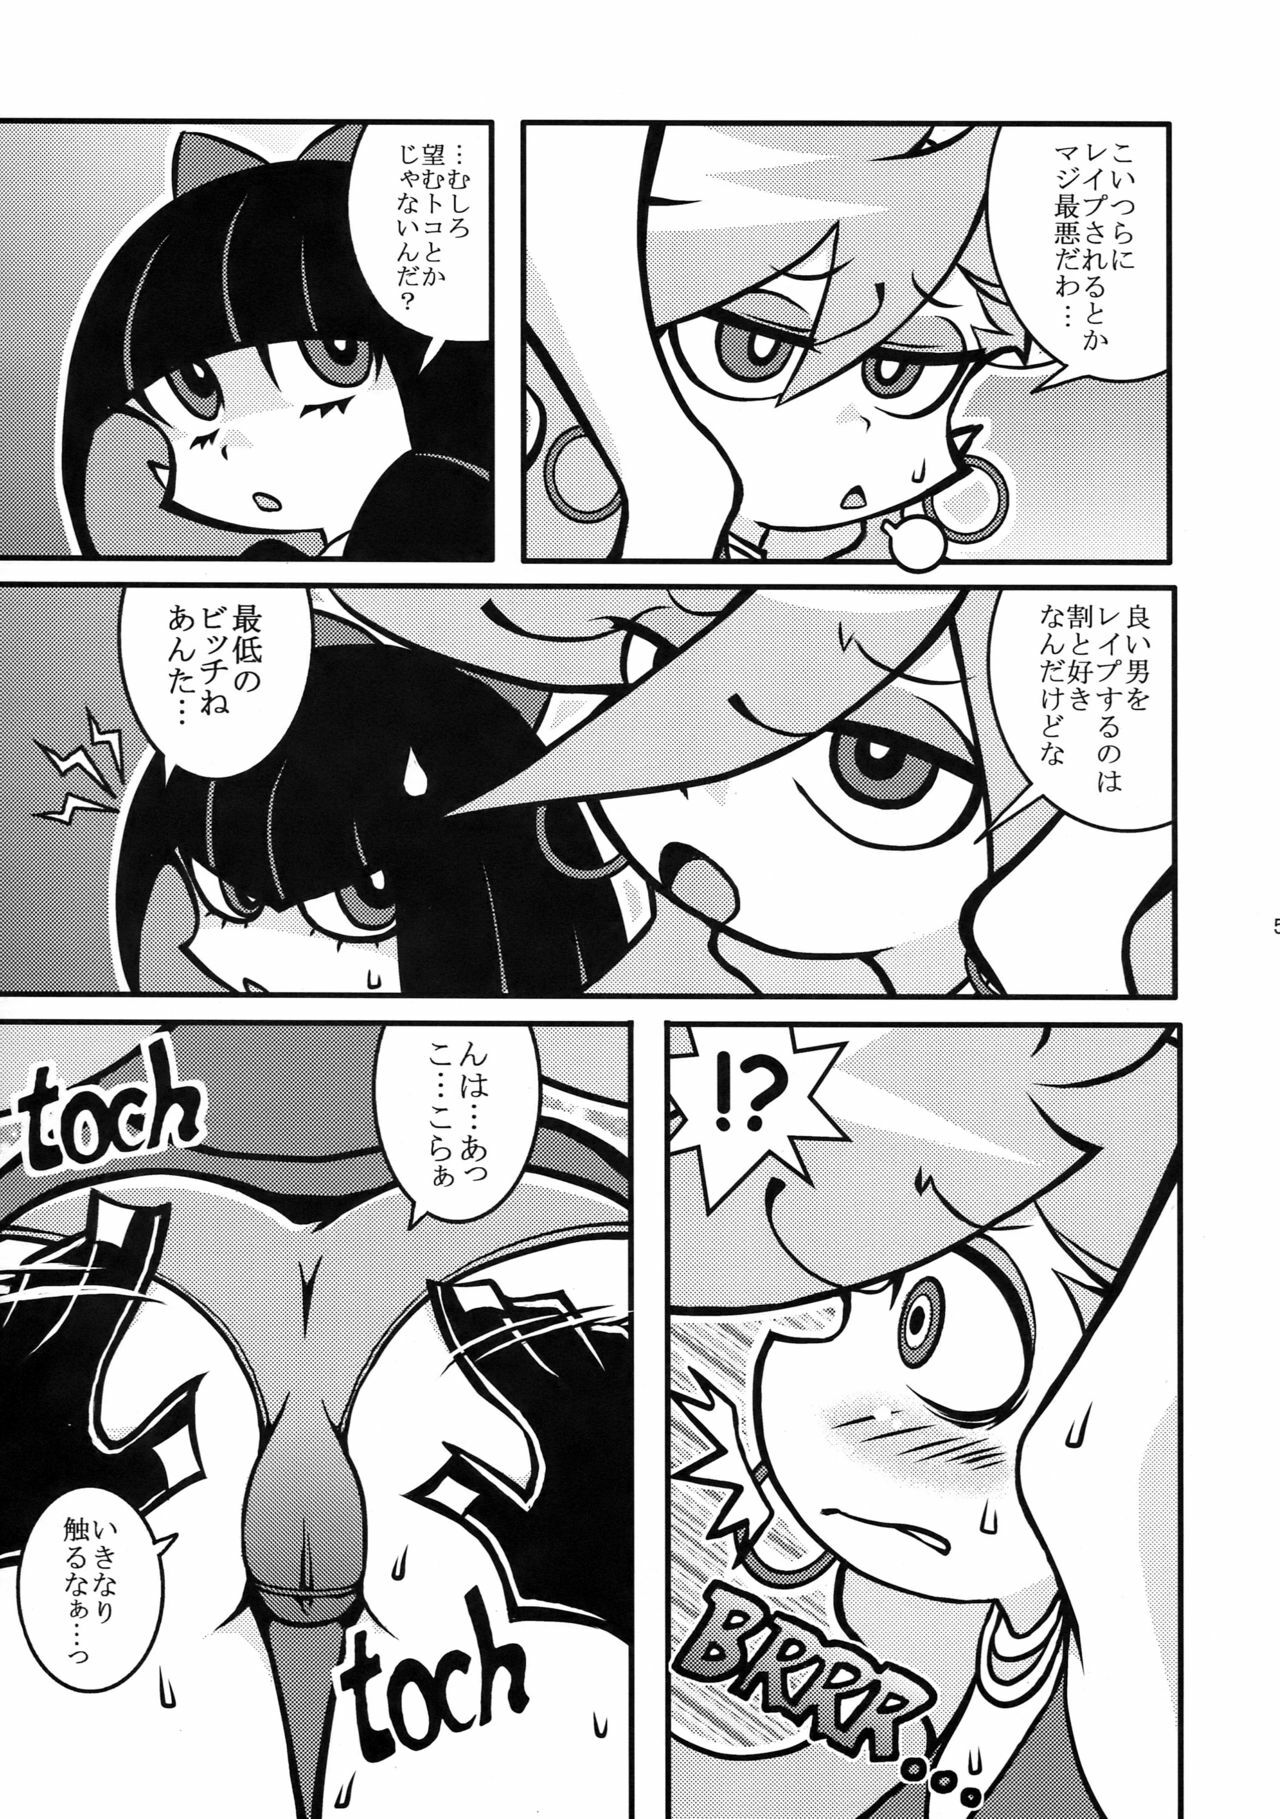 (C79) [1787 (Macaroni and Cheese)] R18 (Panty & Stocking with Garterbelt) page 5 full